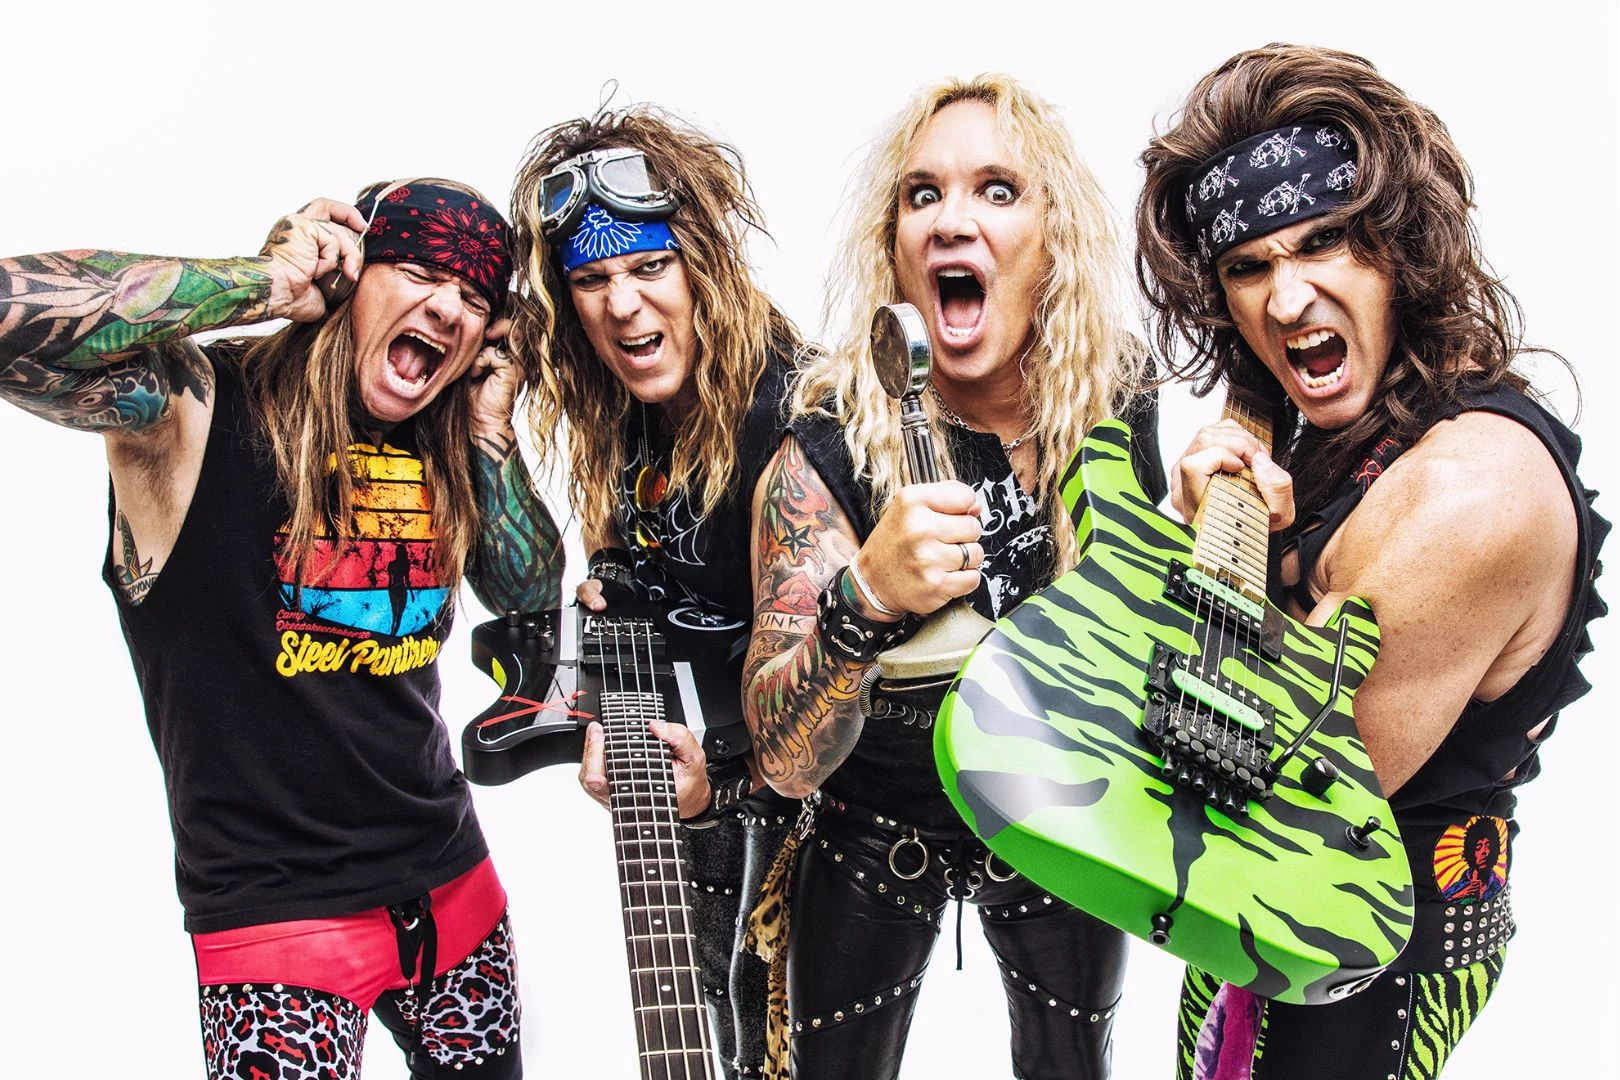 Steel Panther 1987 Video Is Ultimate 80s Tribute, Except For.. pic